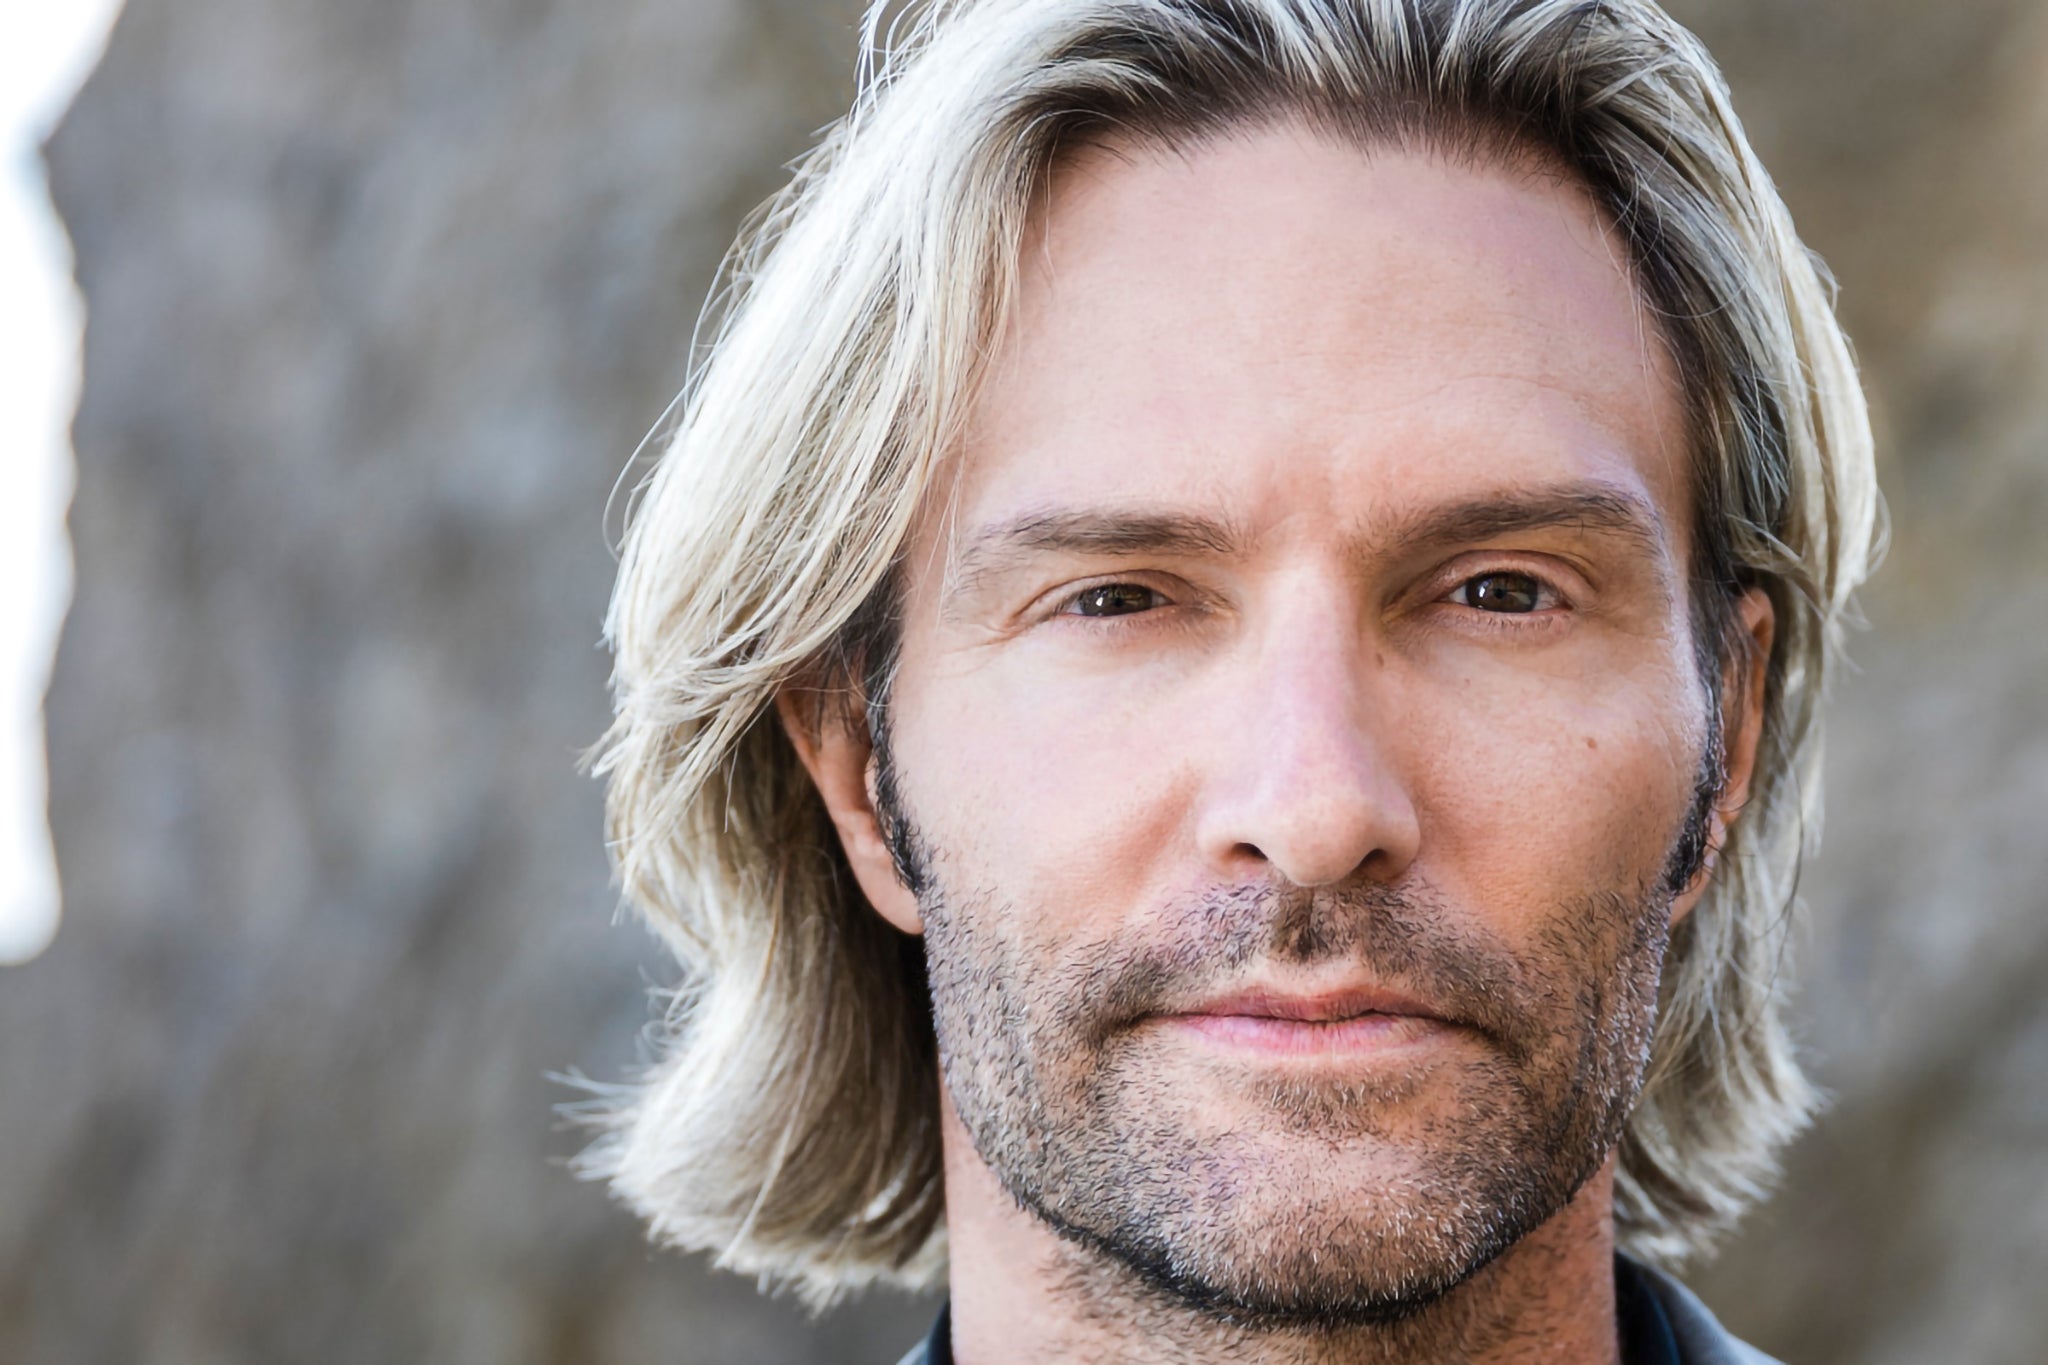 Image used with permission from Ticketmaster | An open rehearsal with Eric Whitacre & NZYC tickets